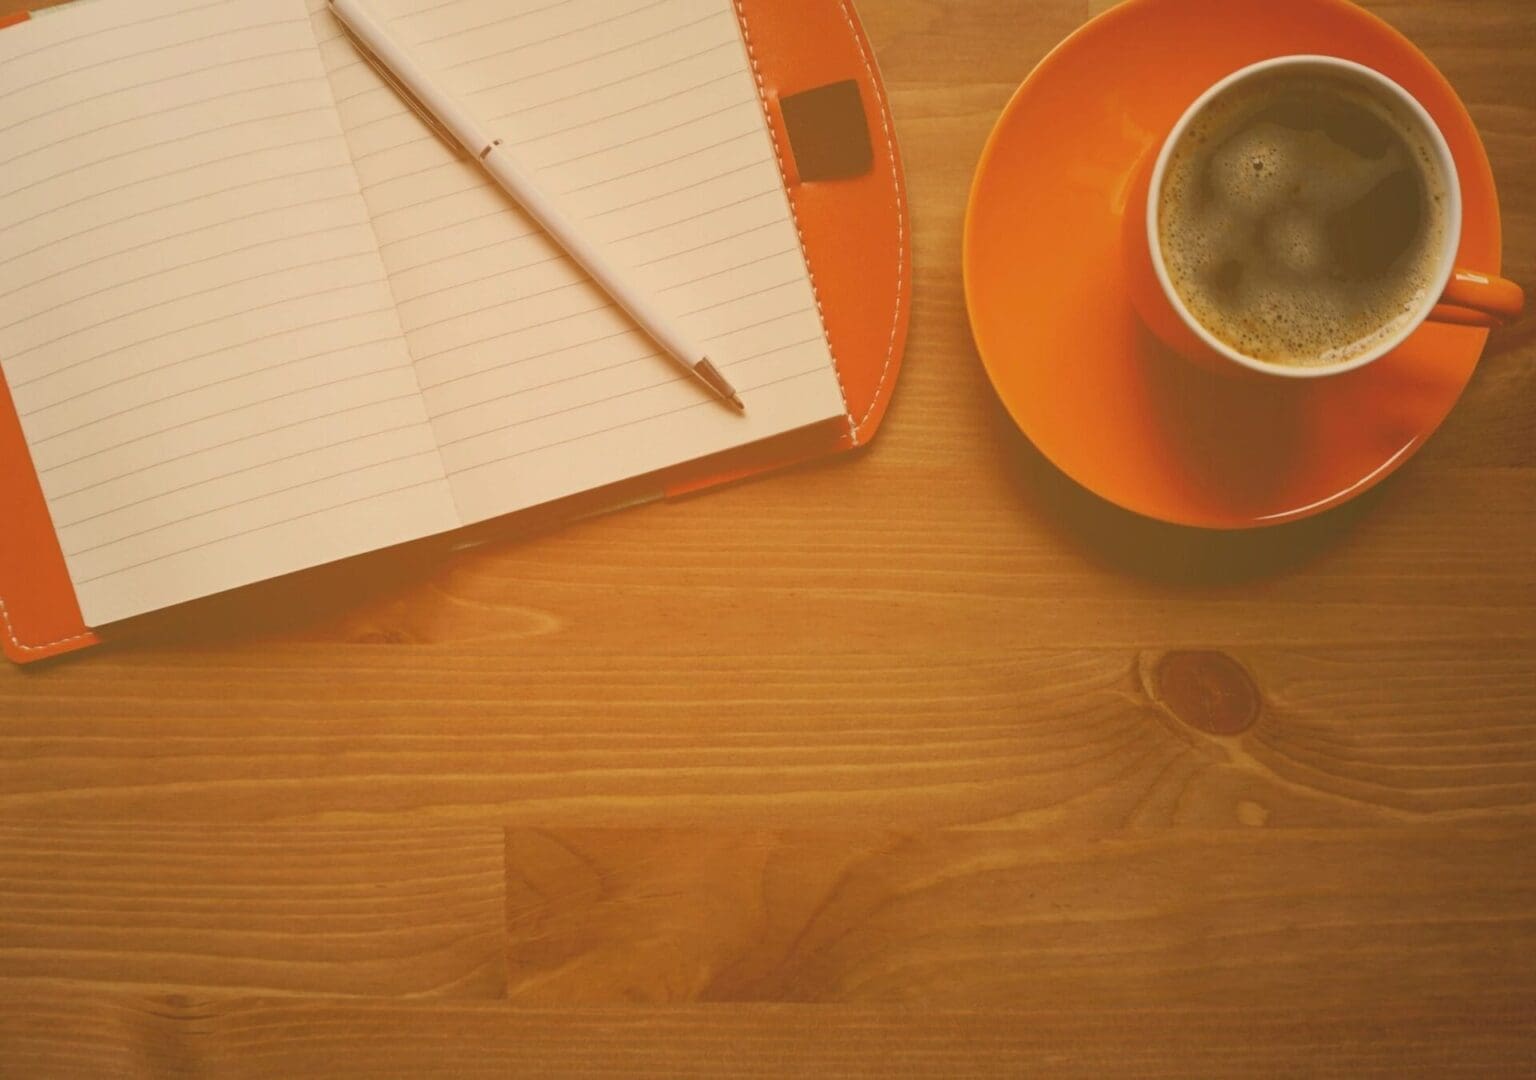 Open notebook with pen and a cup of coffee on a wooden table.